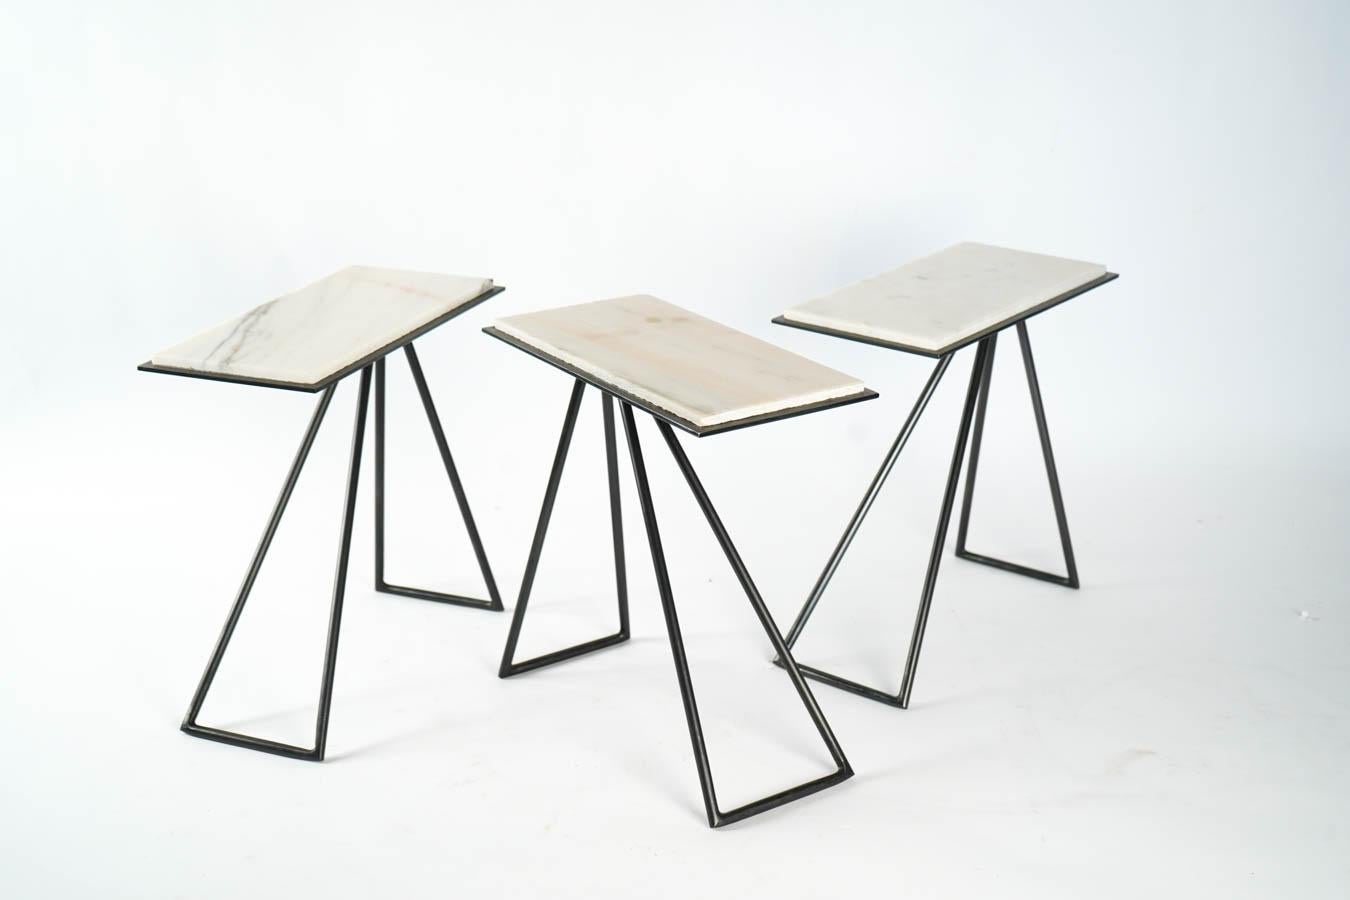 Modular contemporary design coffee tables by Anouchka Potdevin. In stainless steel and marble. Custom ordered in other colors.
Measures: H 34cm, L 32cm, P 17cm.